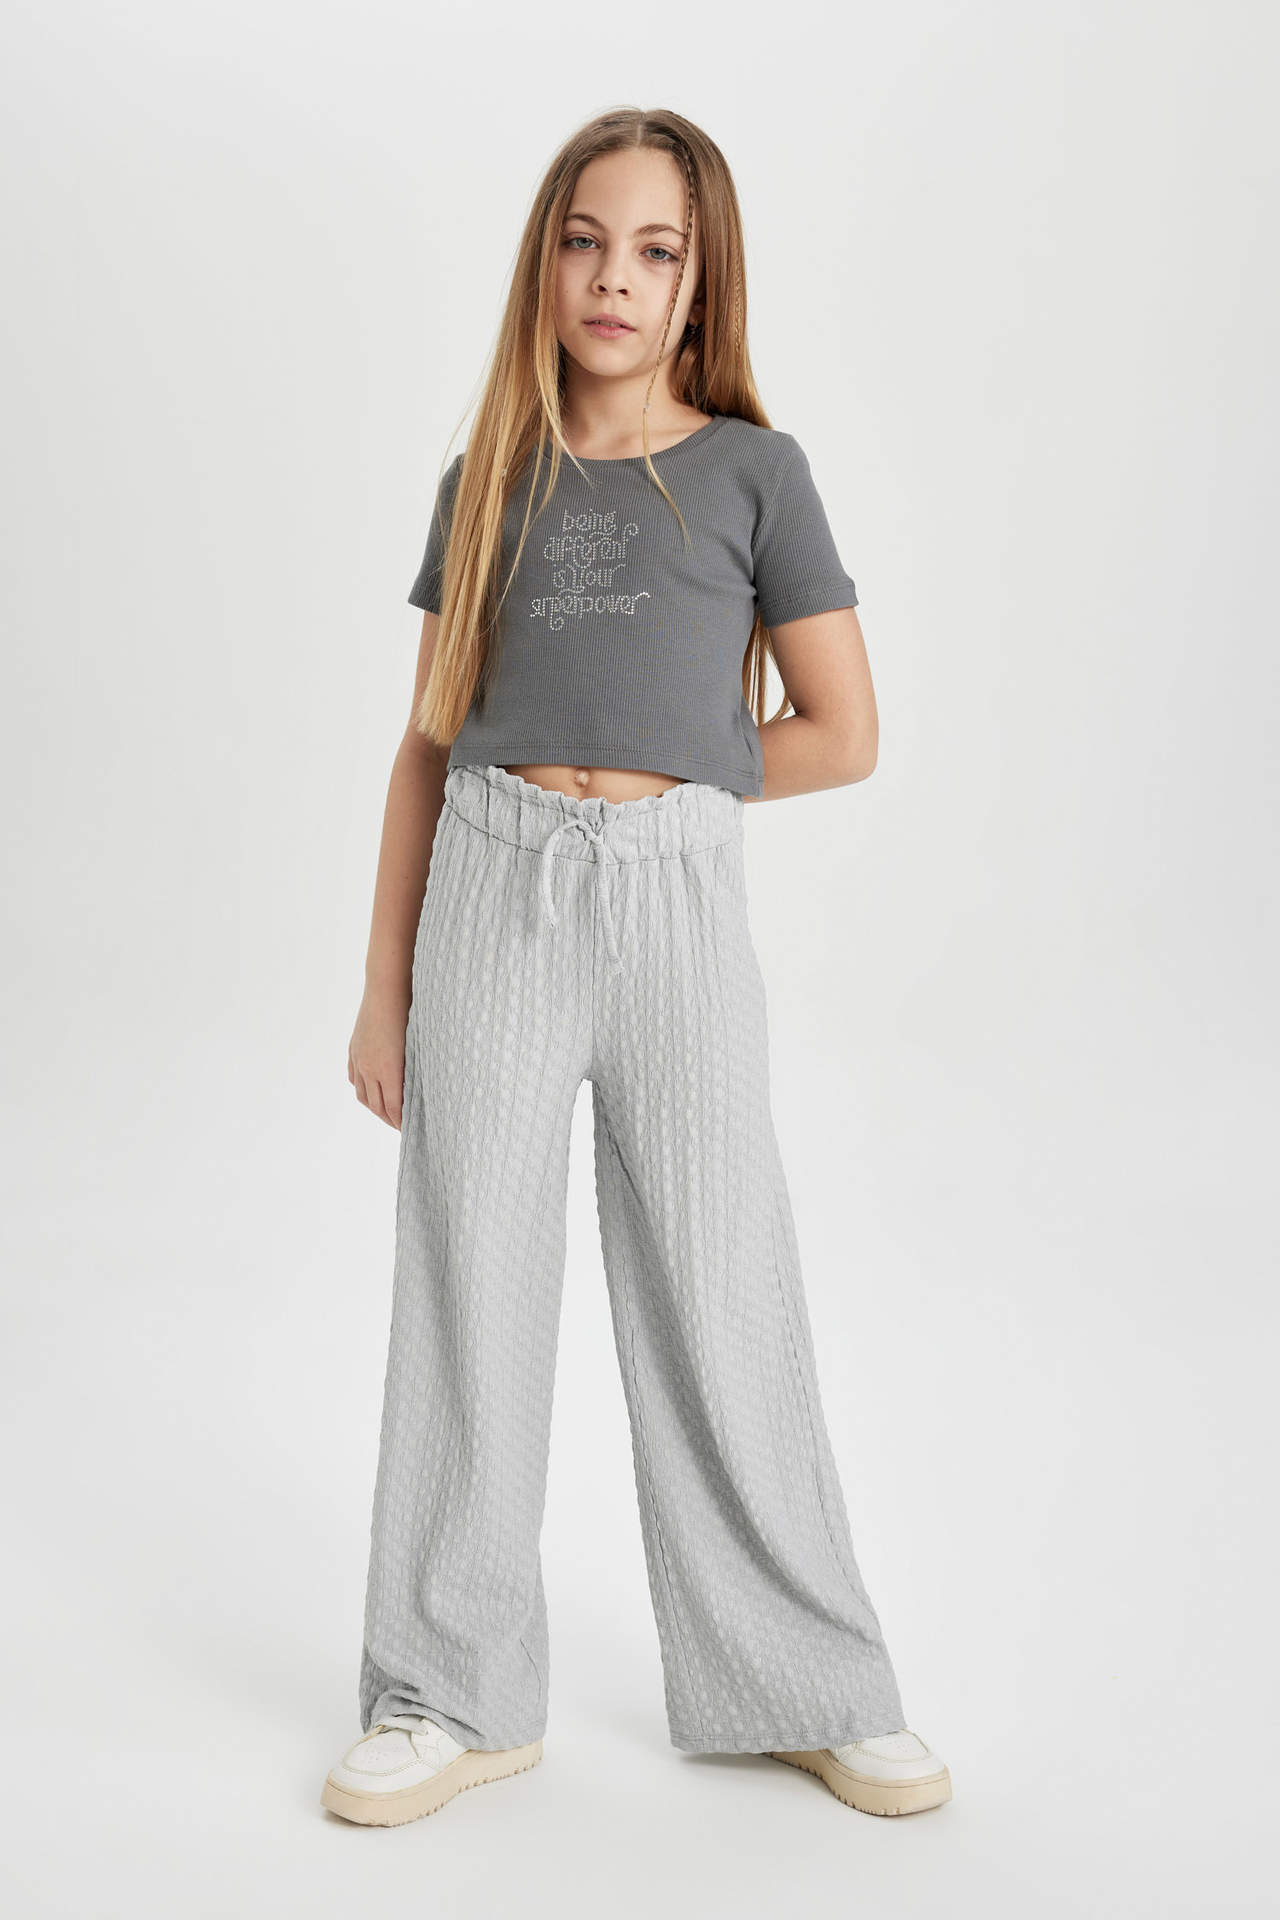 DEFACTO Girl Printed Short Sleeve T-Shirt Trousers 2 Piece Set